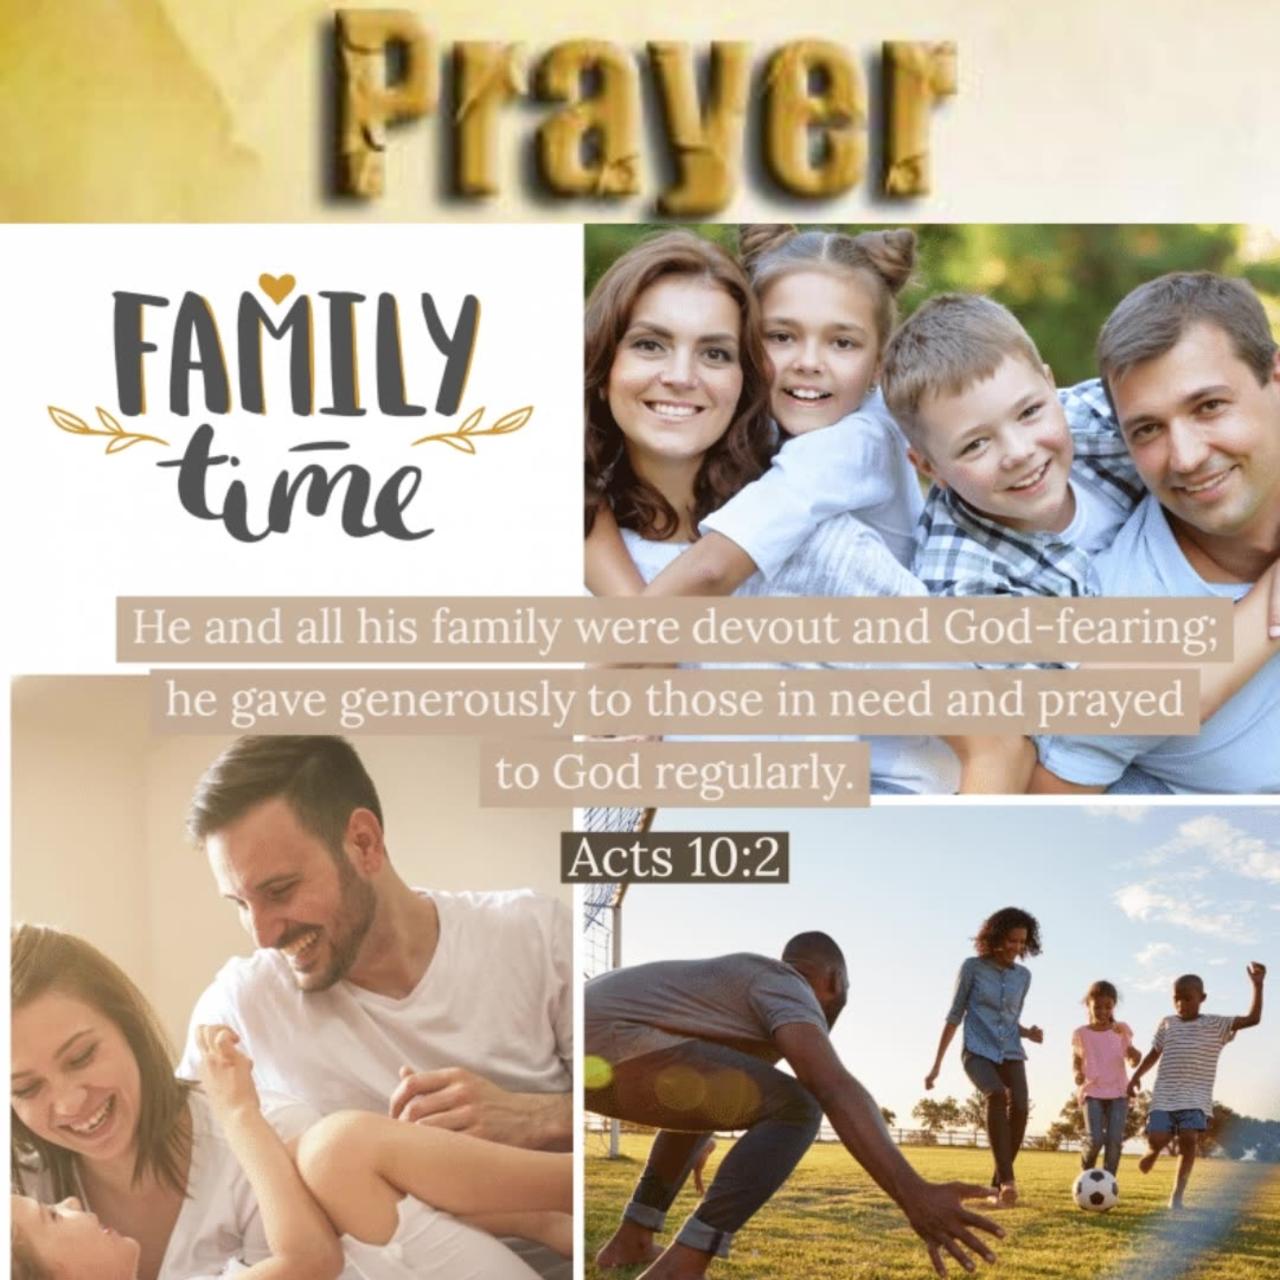 Morning Prayer for Families #youtubeshorts #jesus #grace #mercy #faith #blessed #fyp #trust #love